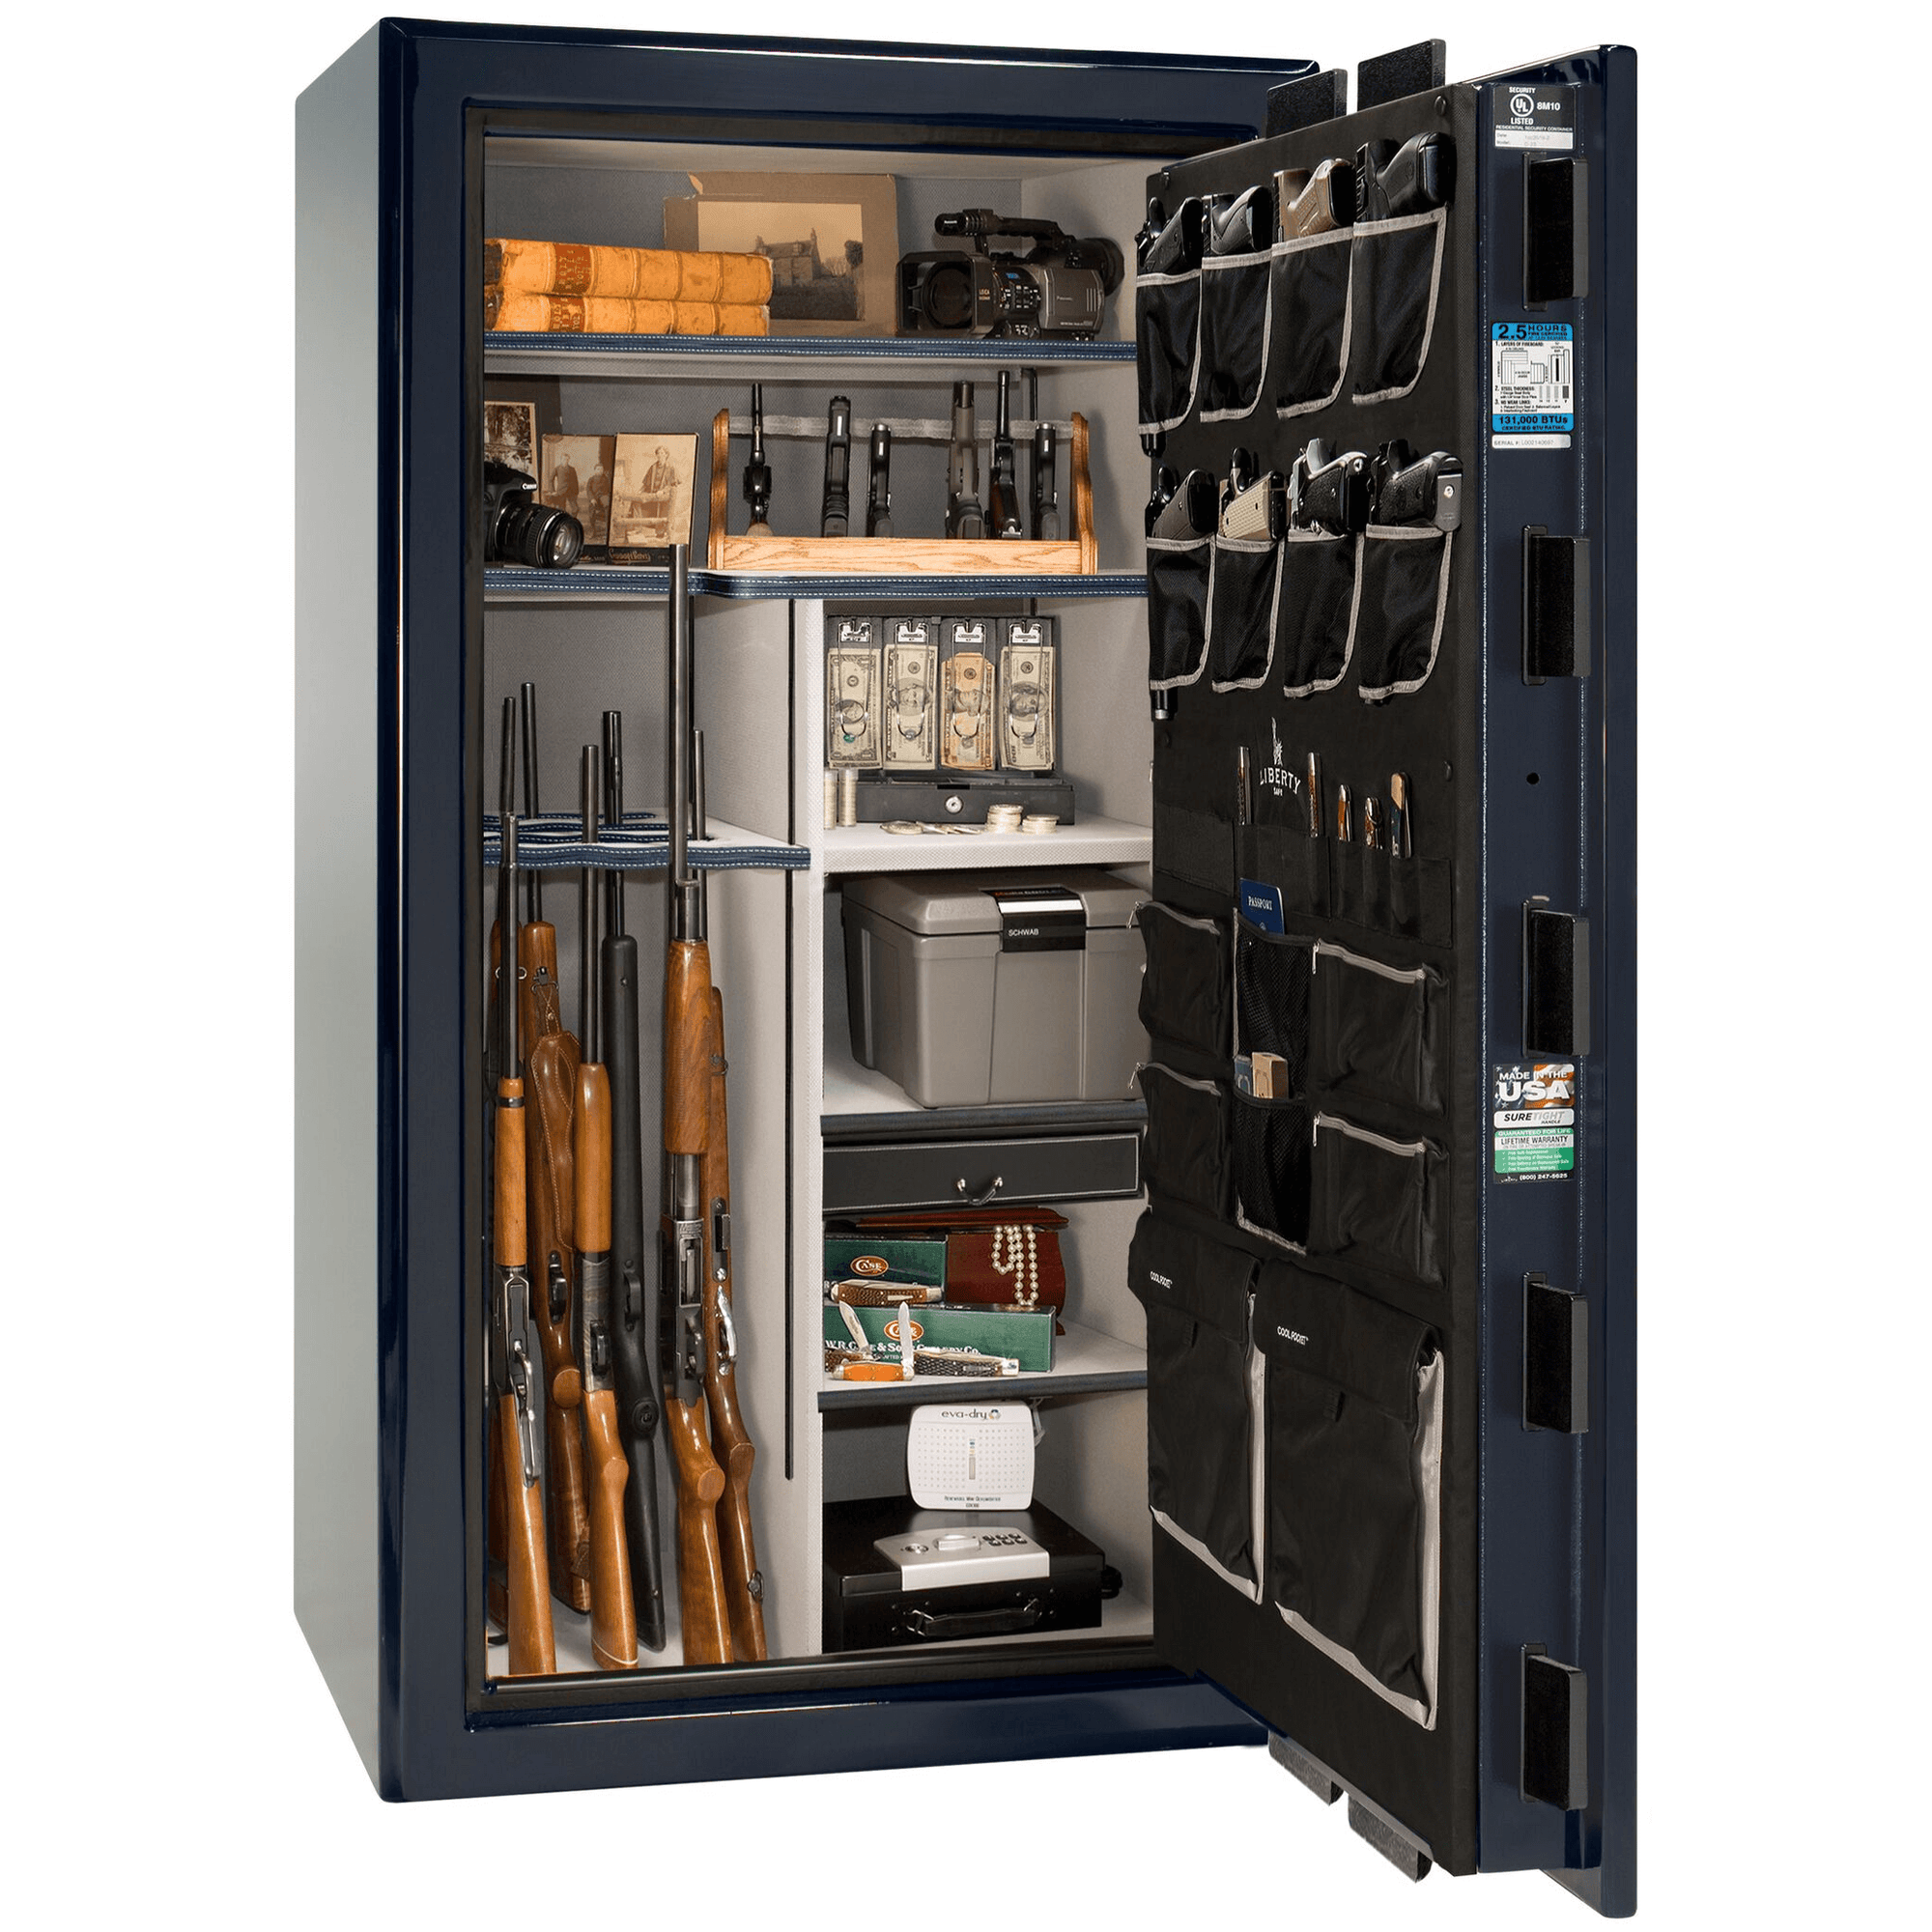 Presidential | 40 | Level 8 Security | 150 Minute Fire Protection | Blue Gloss | Chrome Mechanical Lock | 65.5"(H) x 36"(W) x 32"(D)